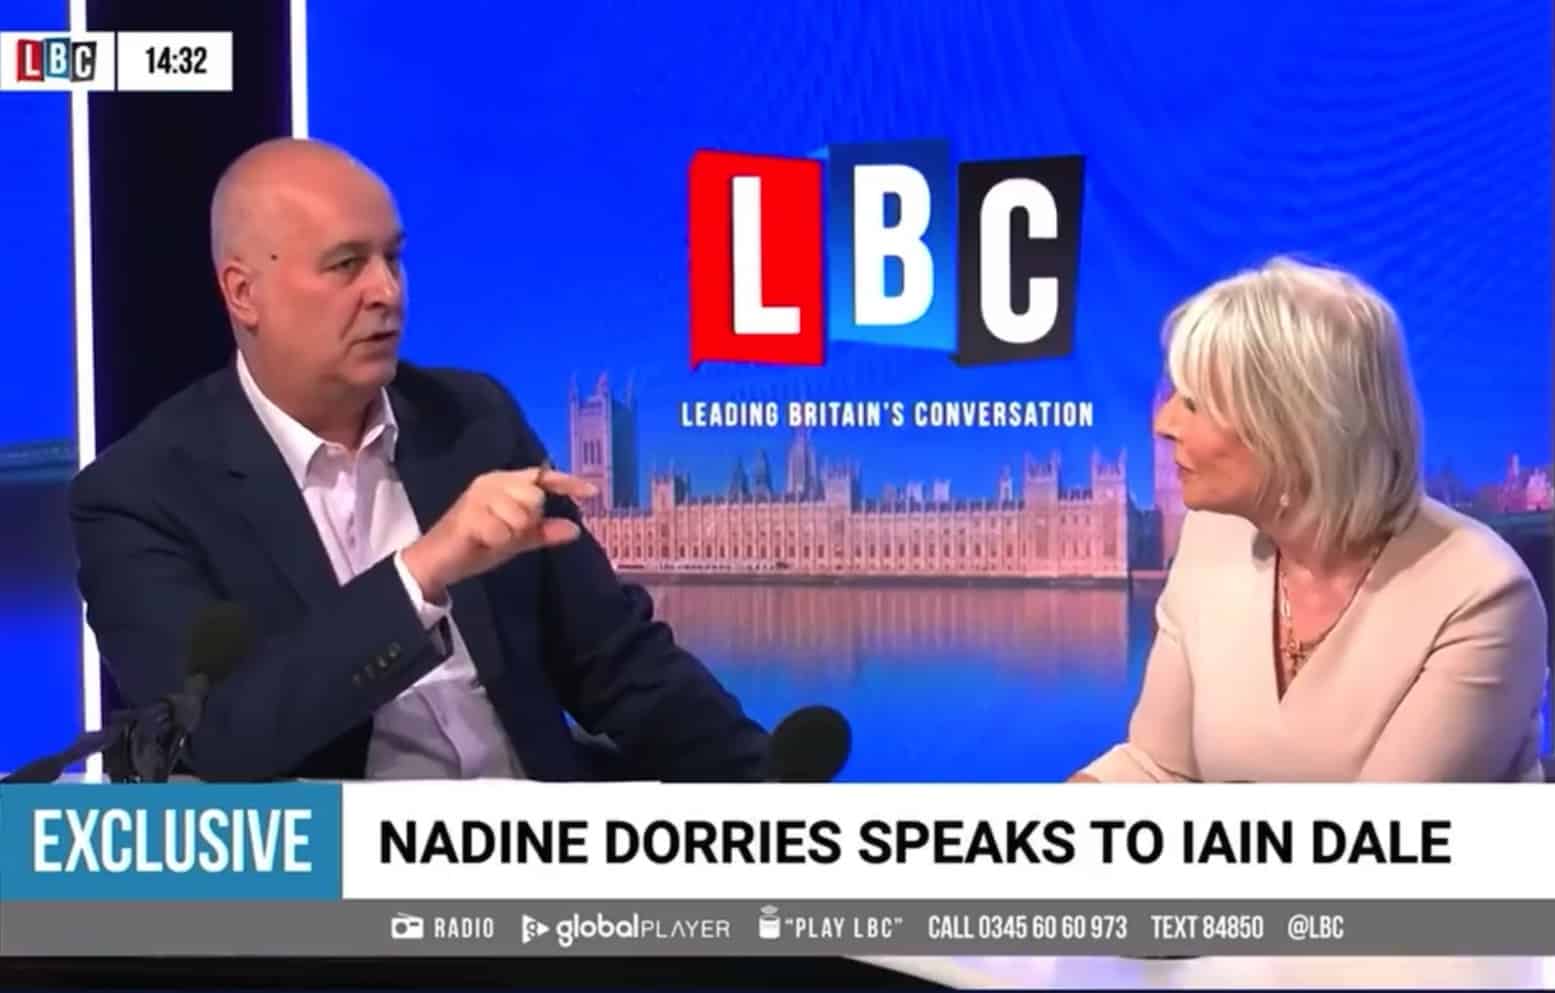 Nadine Dorries drops another howler – this time she’s got Channel 5 all wrong